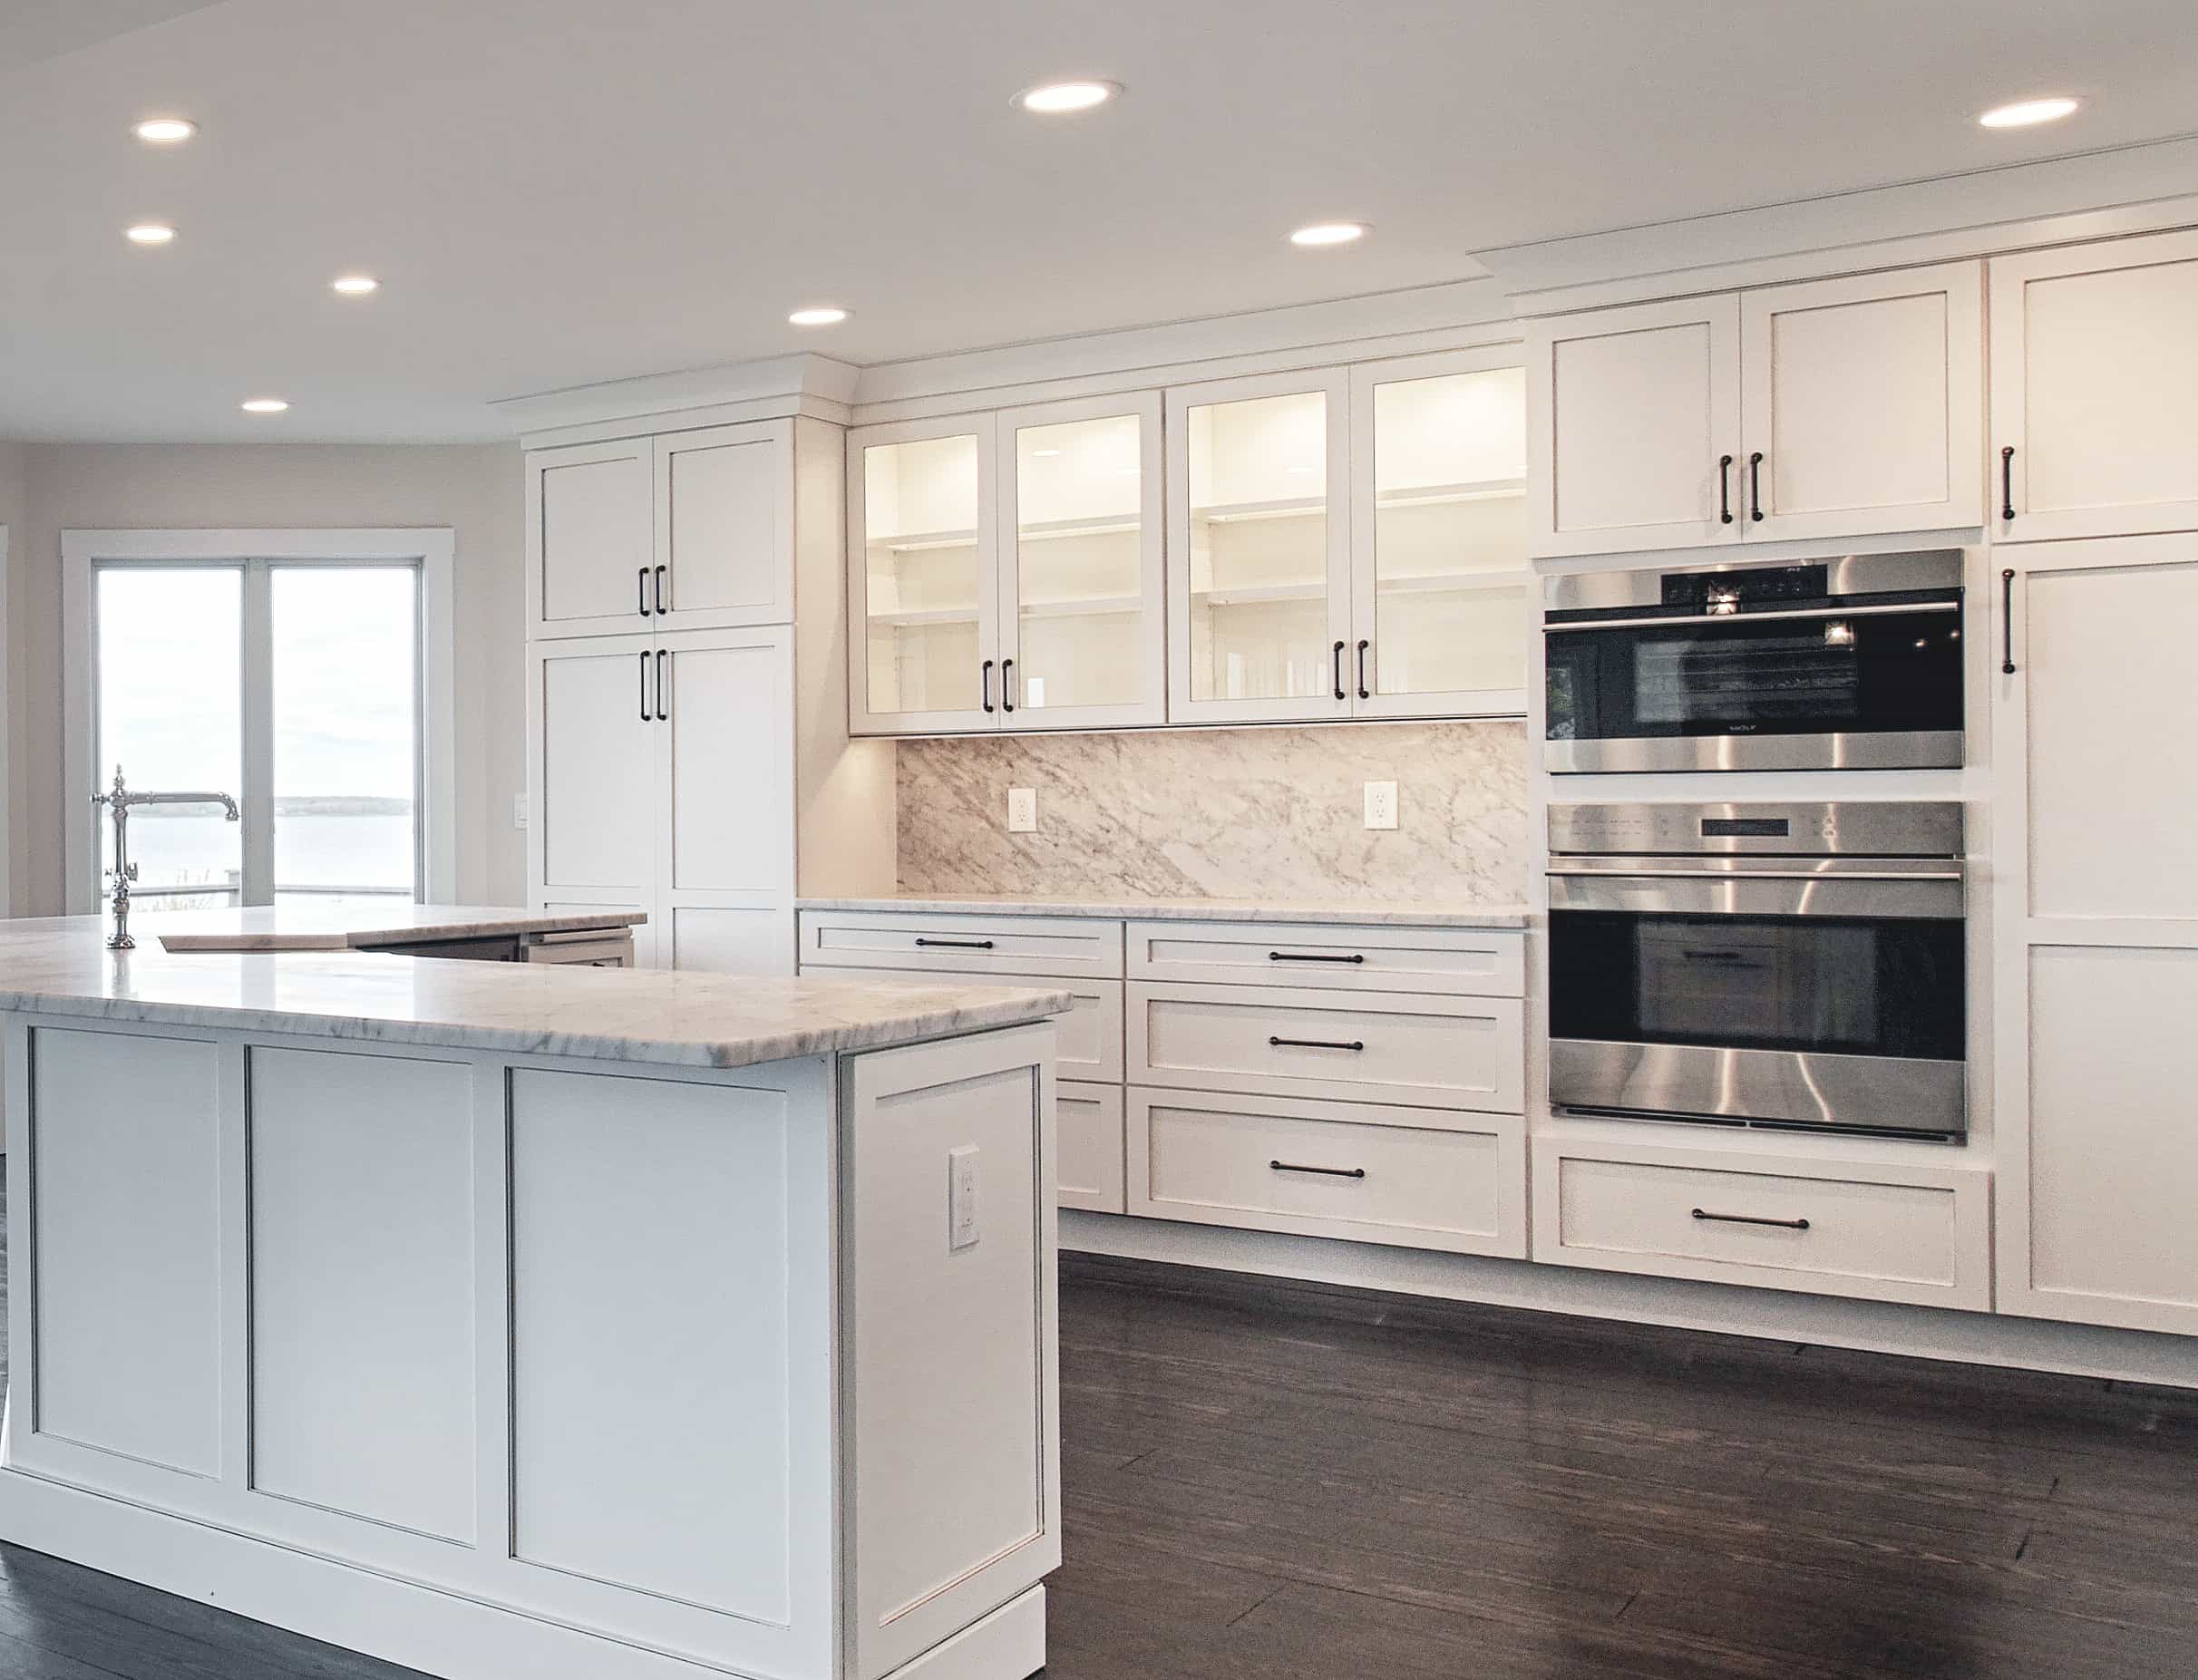 What To Look For When Buying Kitchen Cabinets In RI